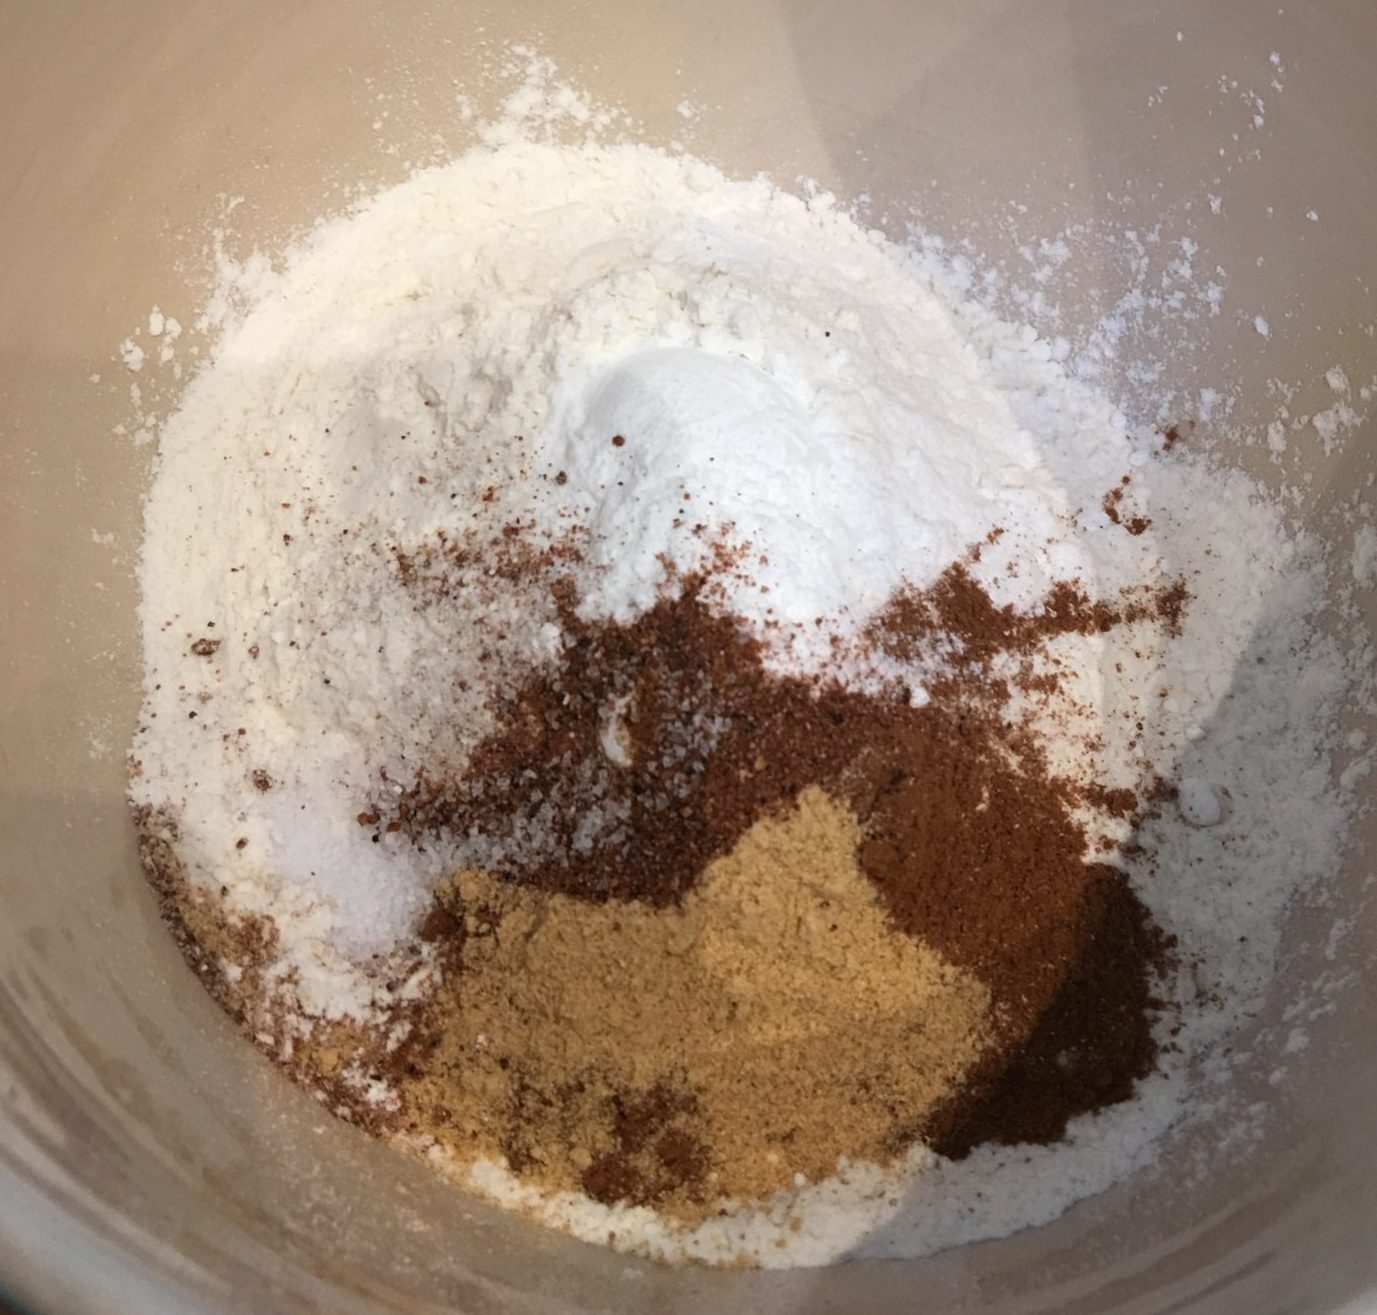 Dry ingredients for spiced muffins